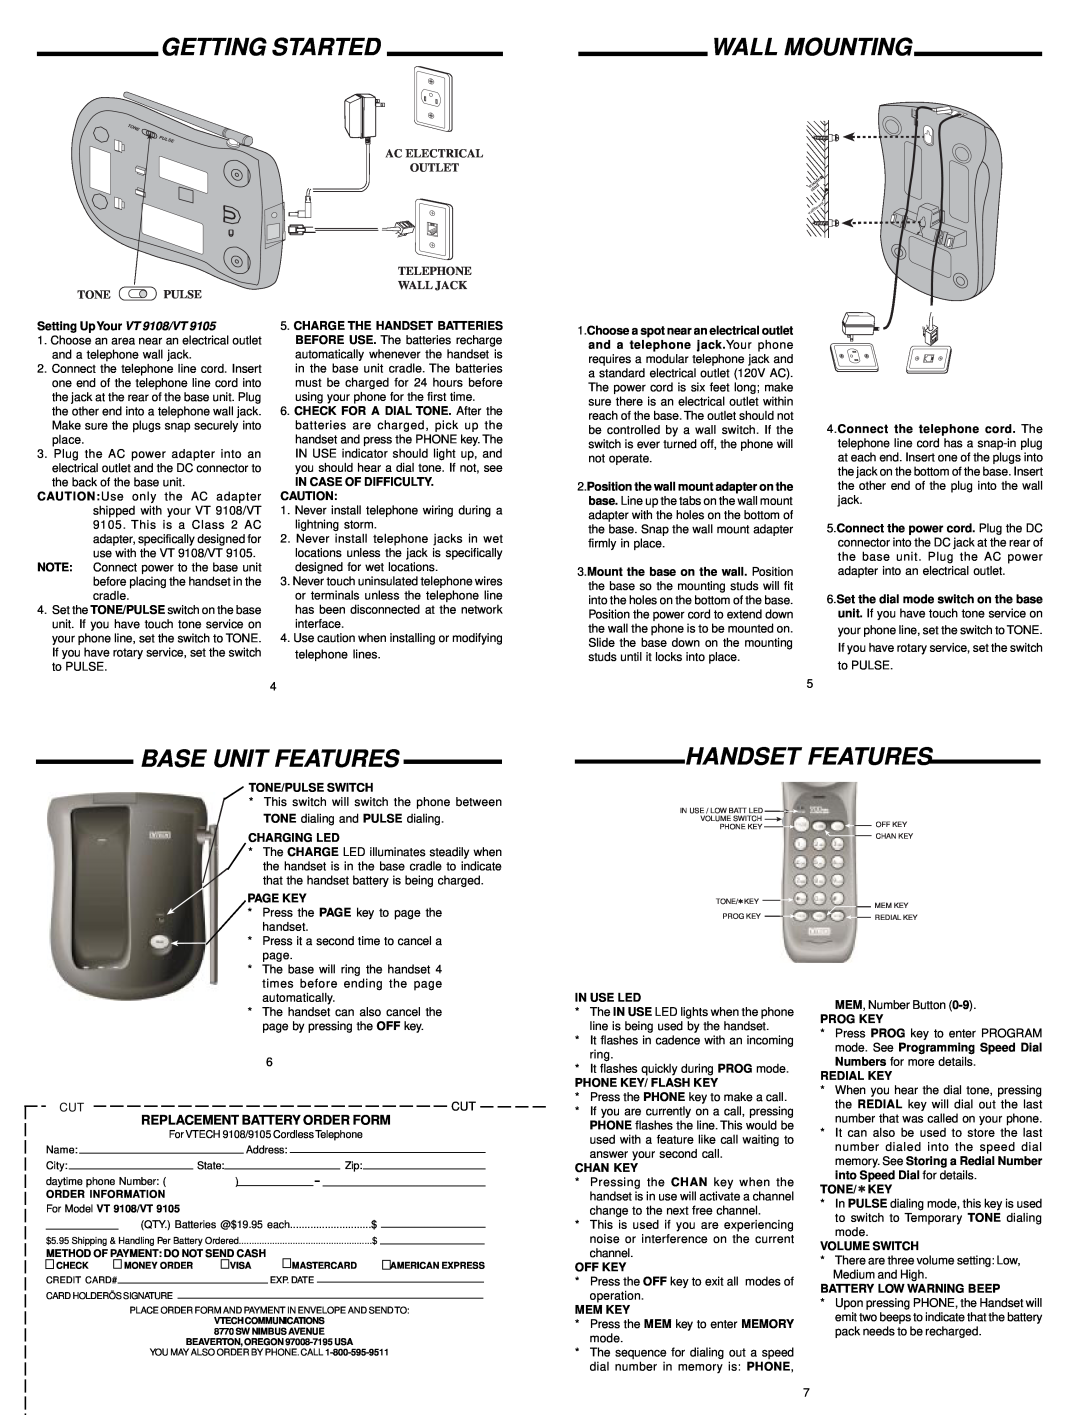 VTech 9108, 9105 Getting Started, Wall Mounting, Base Unit Features, Handset Features, Replacement Battery Order Form 